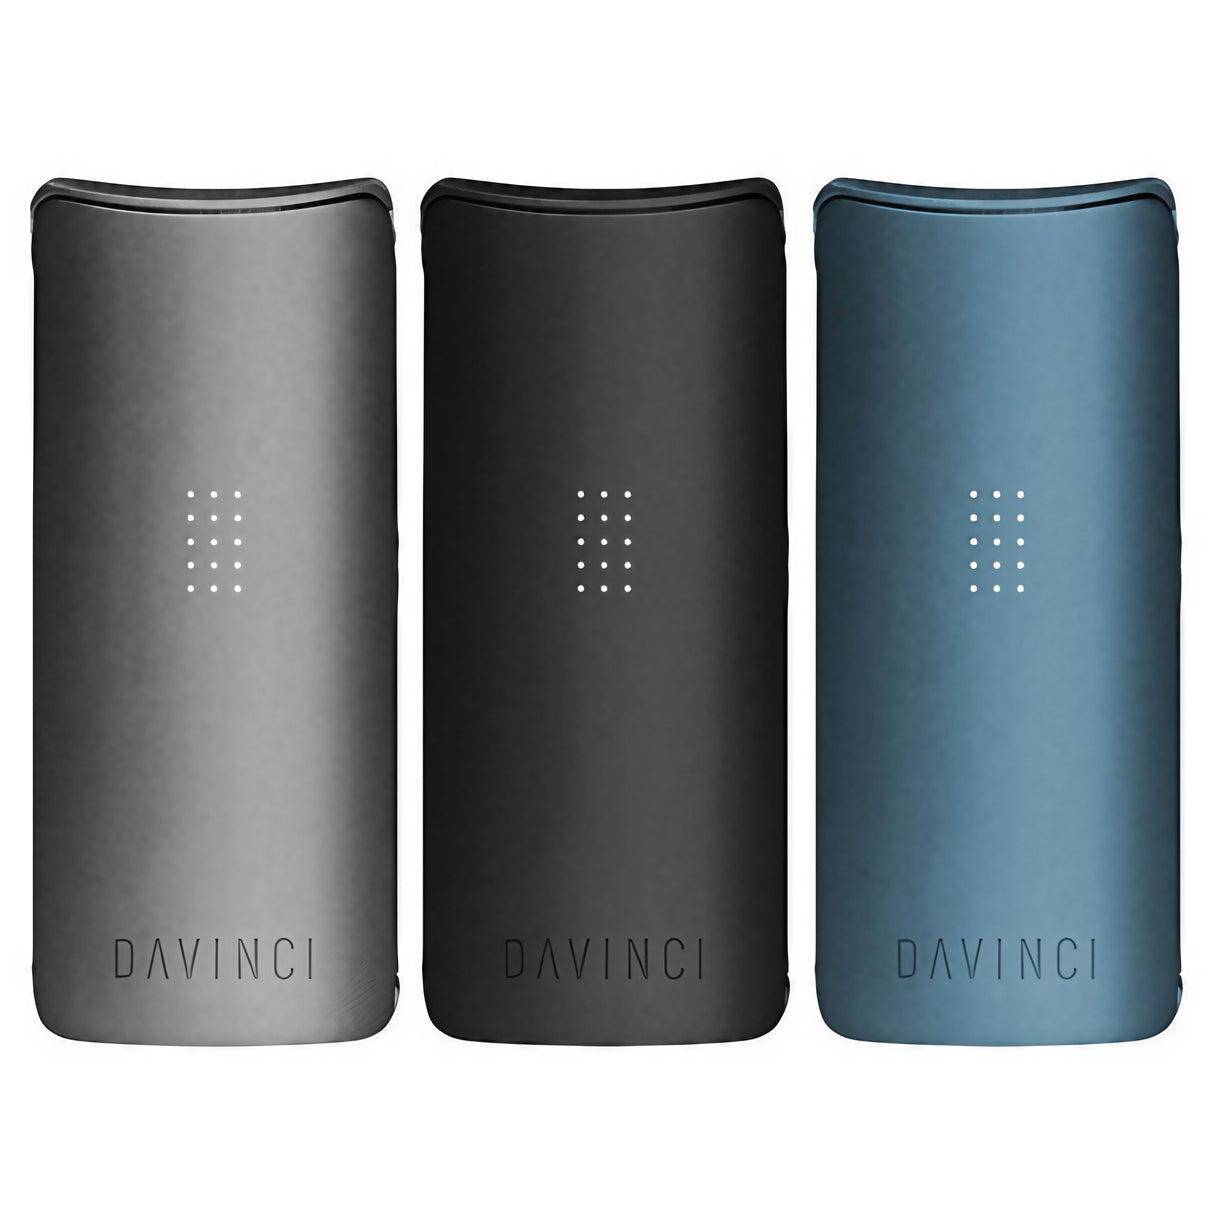 daVinci Miqro Dry Herb Vaporizers in gray, black, and blue - front view with LED lights